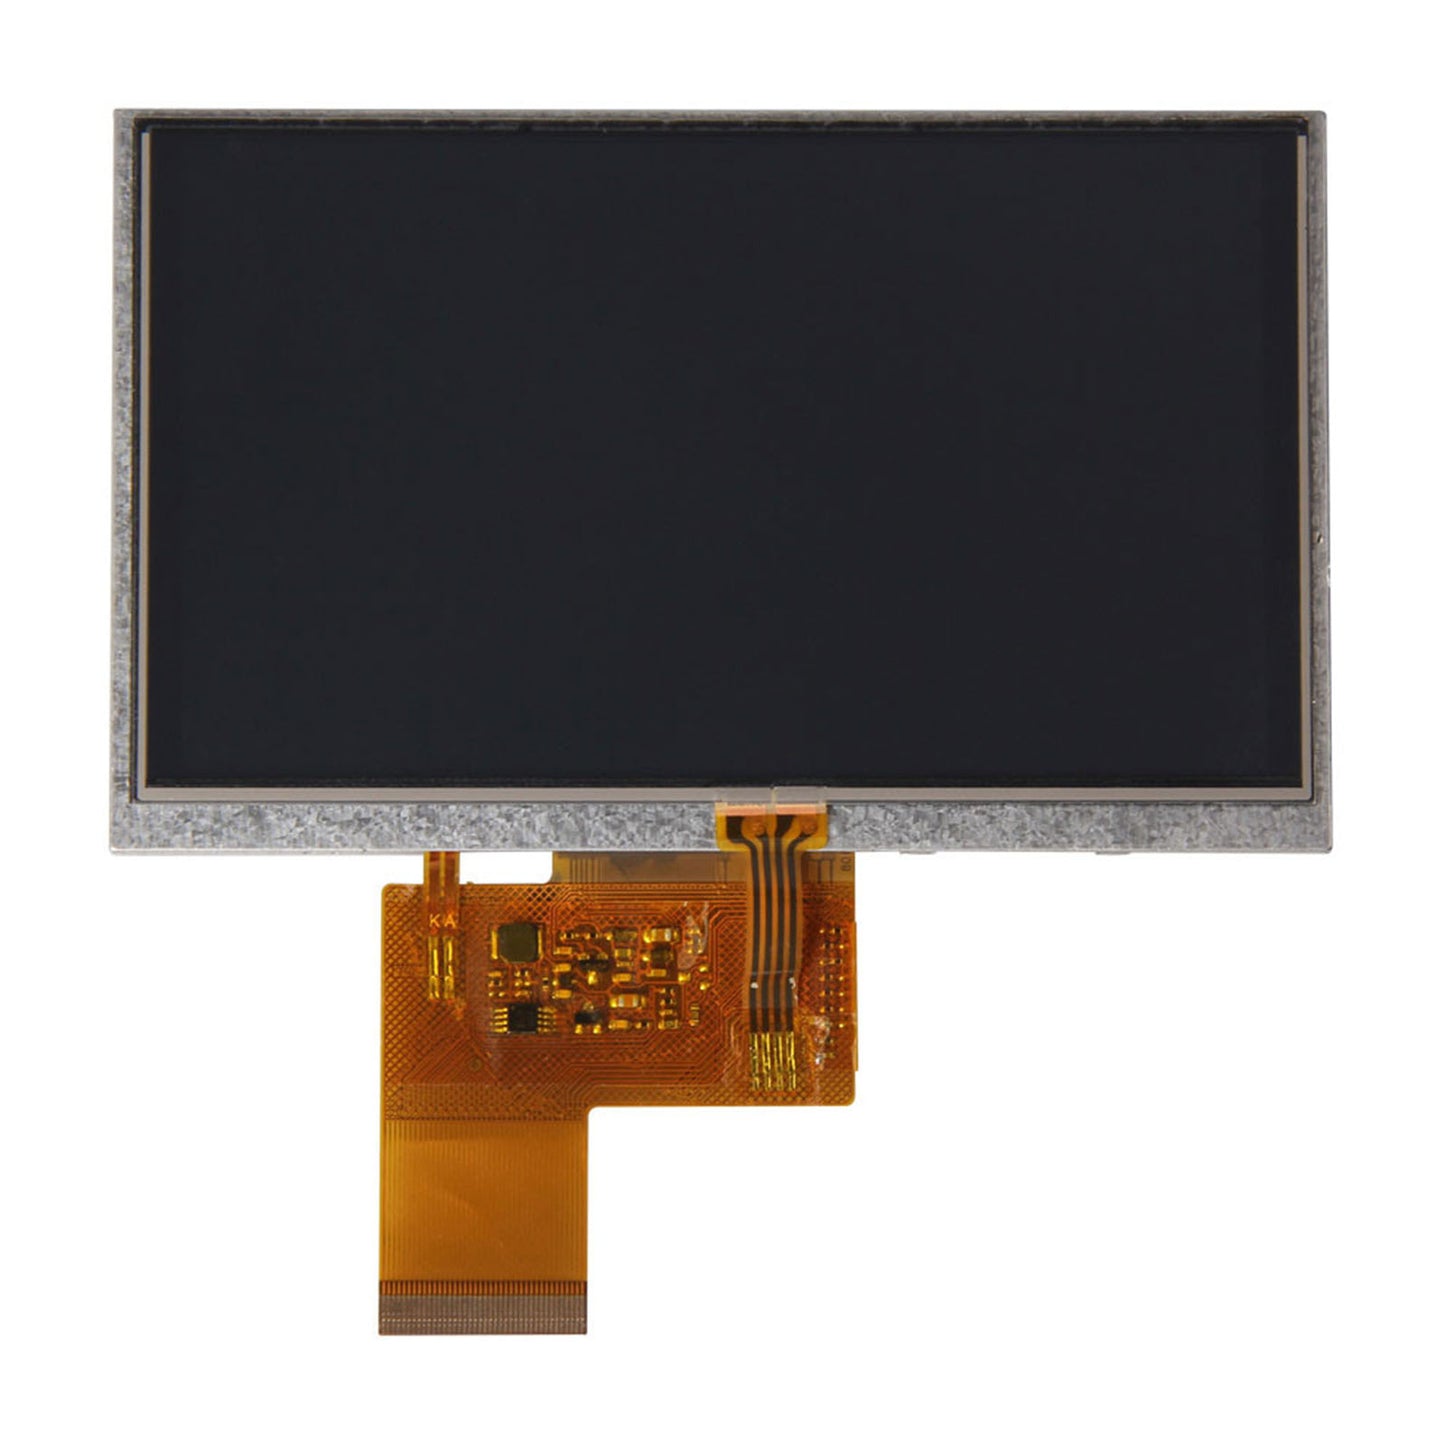 DisplayModule 5.0" 800x480 TFT LCD Display Panel With Resistive Touch - RGB